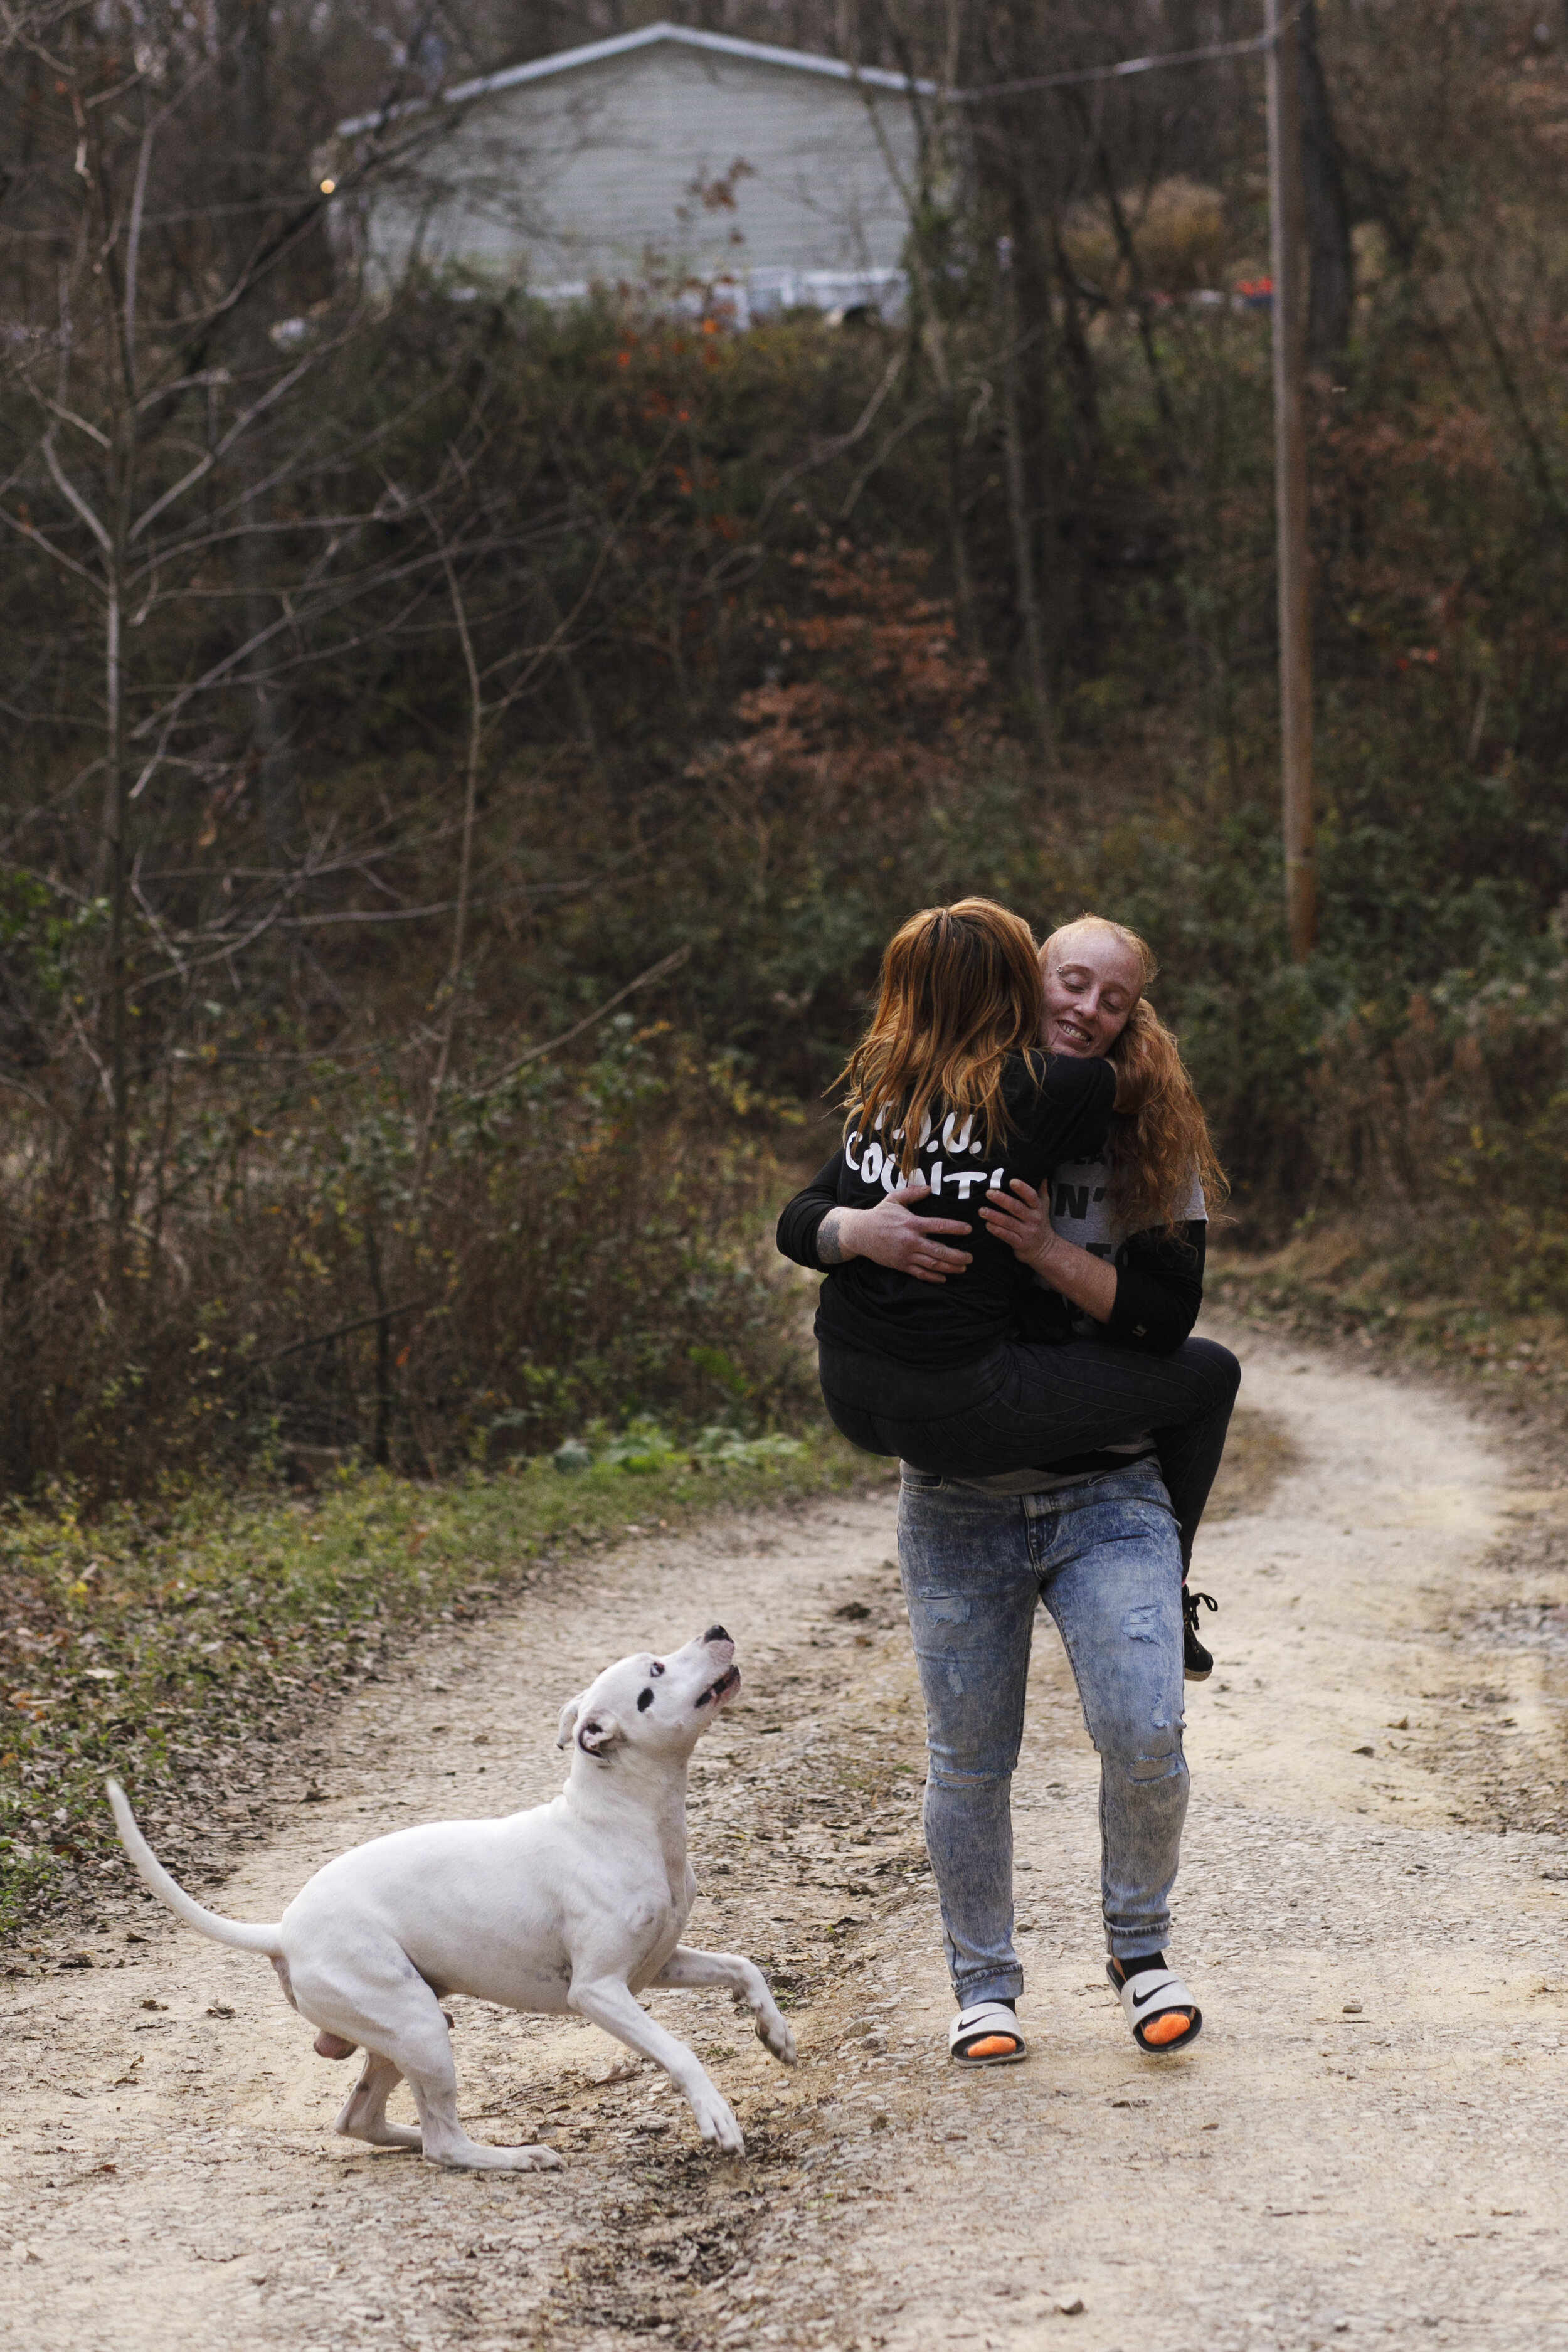  Tasia runs to greet Staci, jumping into her arms with her dog Romeo. “[Tasia] didn't like us kissing, holding hands… she was always like competing with Staci… She would say she hated when I kissed Stacy because it made her feel like I loved Staci mo